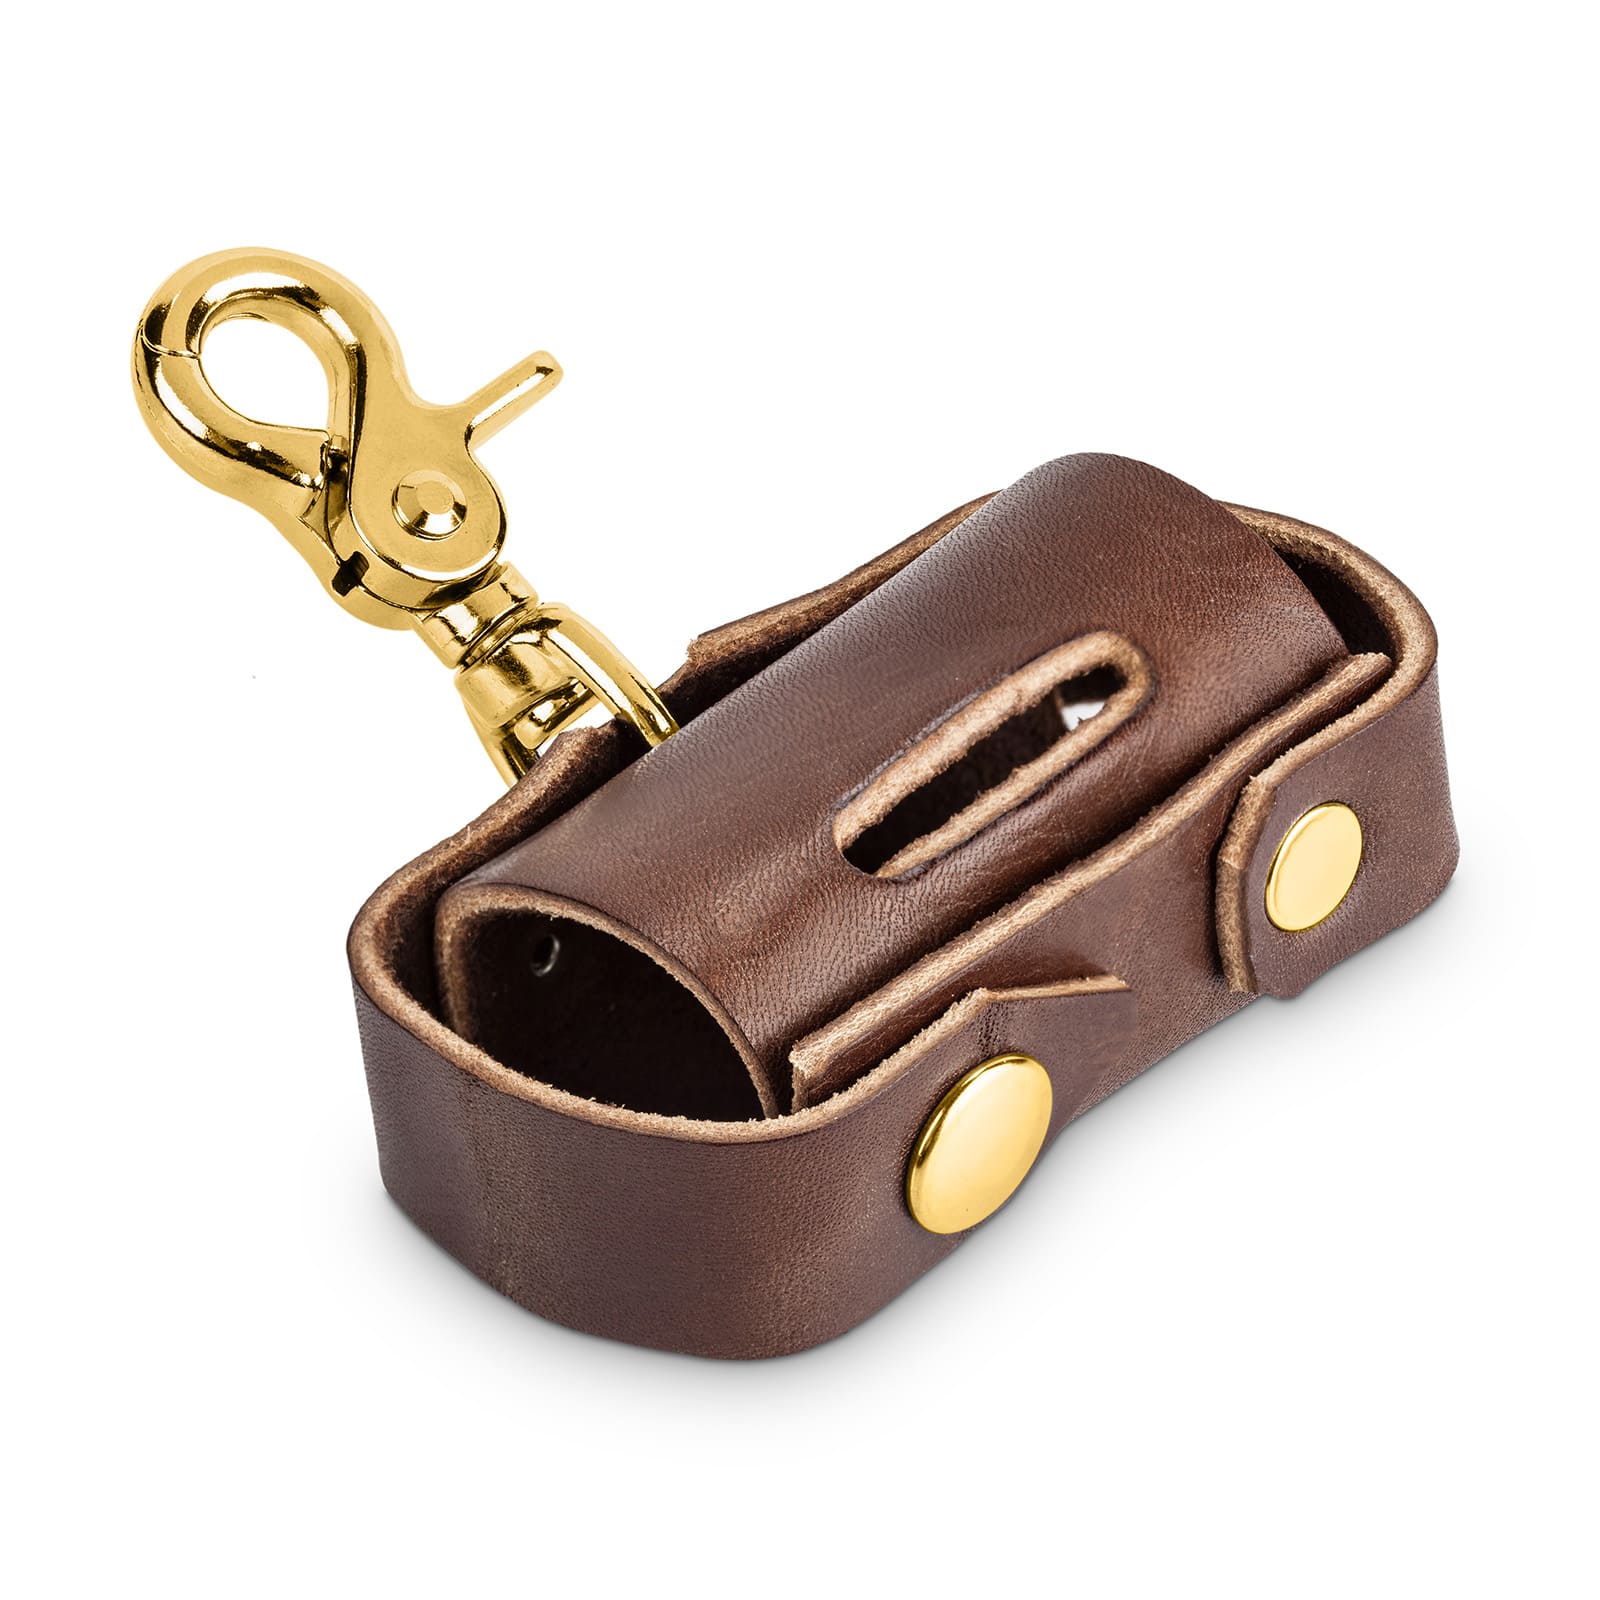 Brown leather, brass carabiner